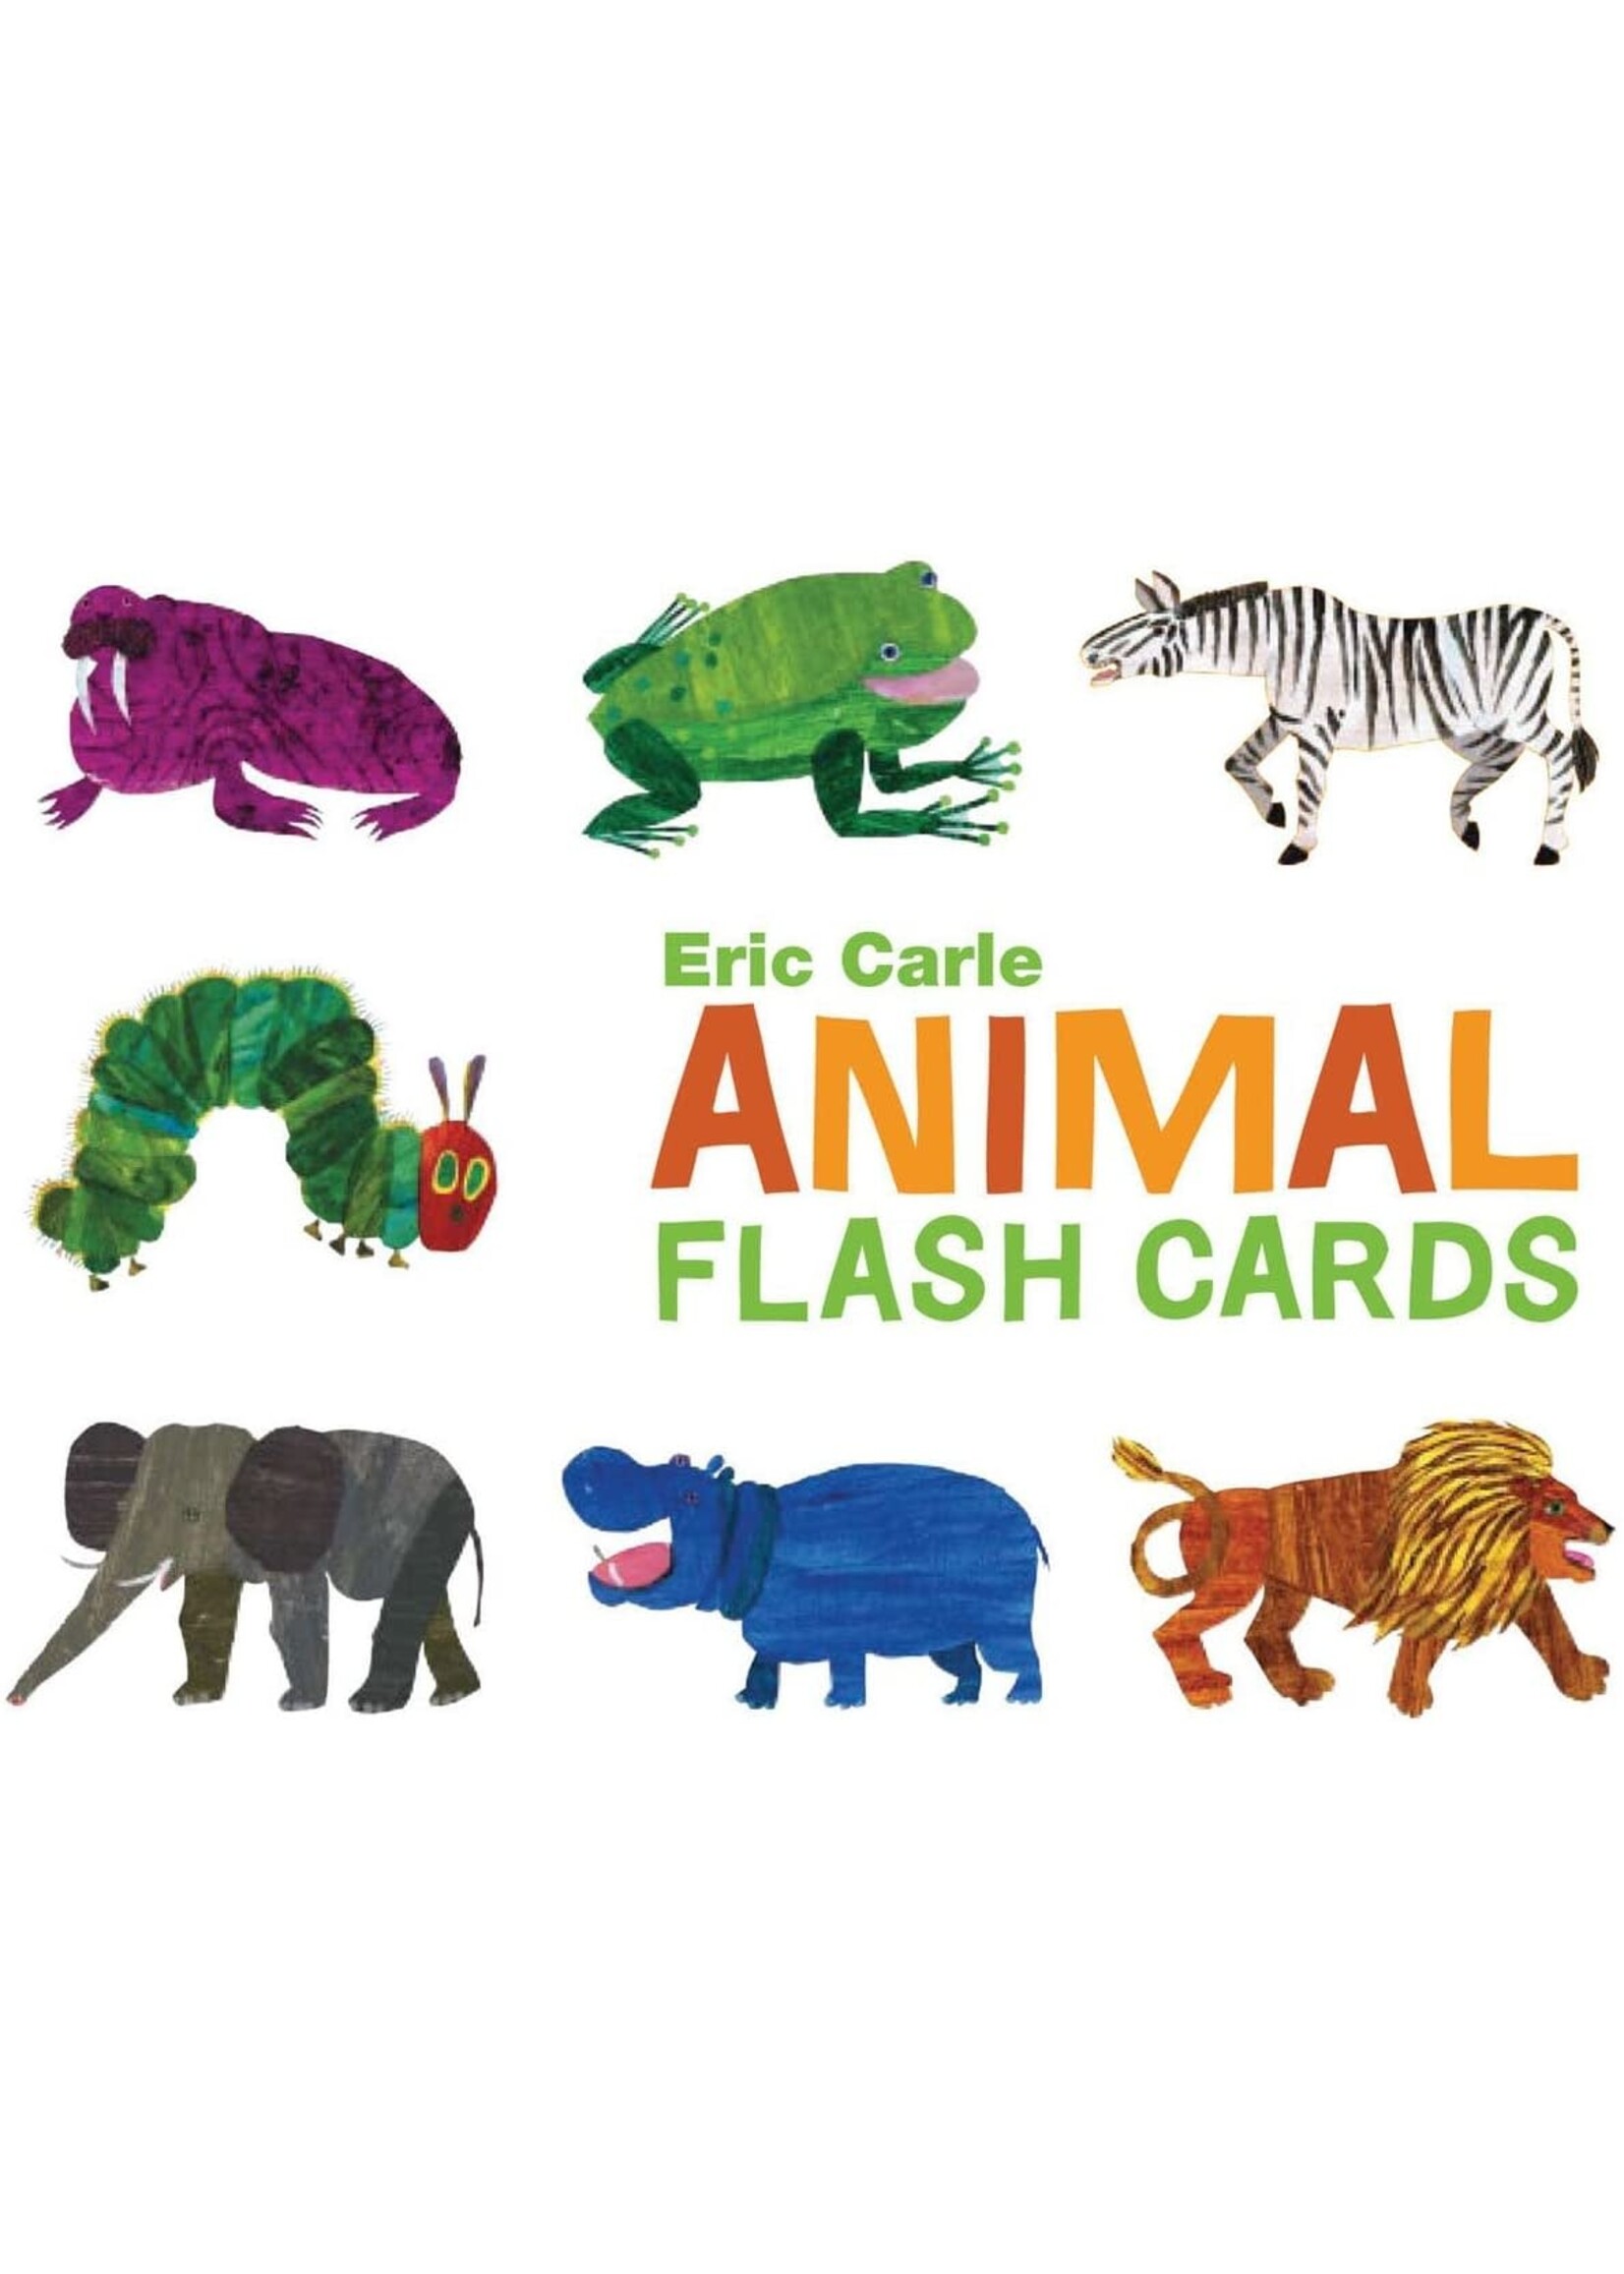 Animal Flash Cards by Eric Carle